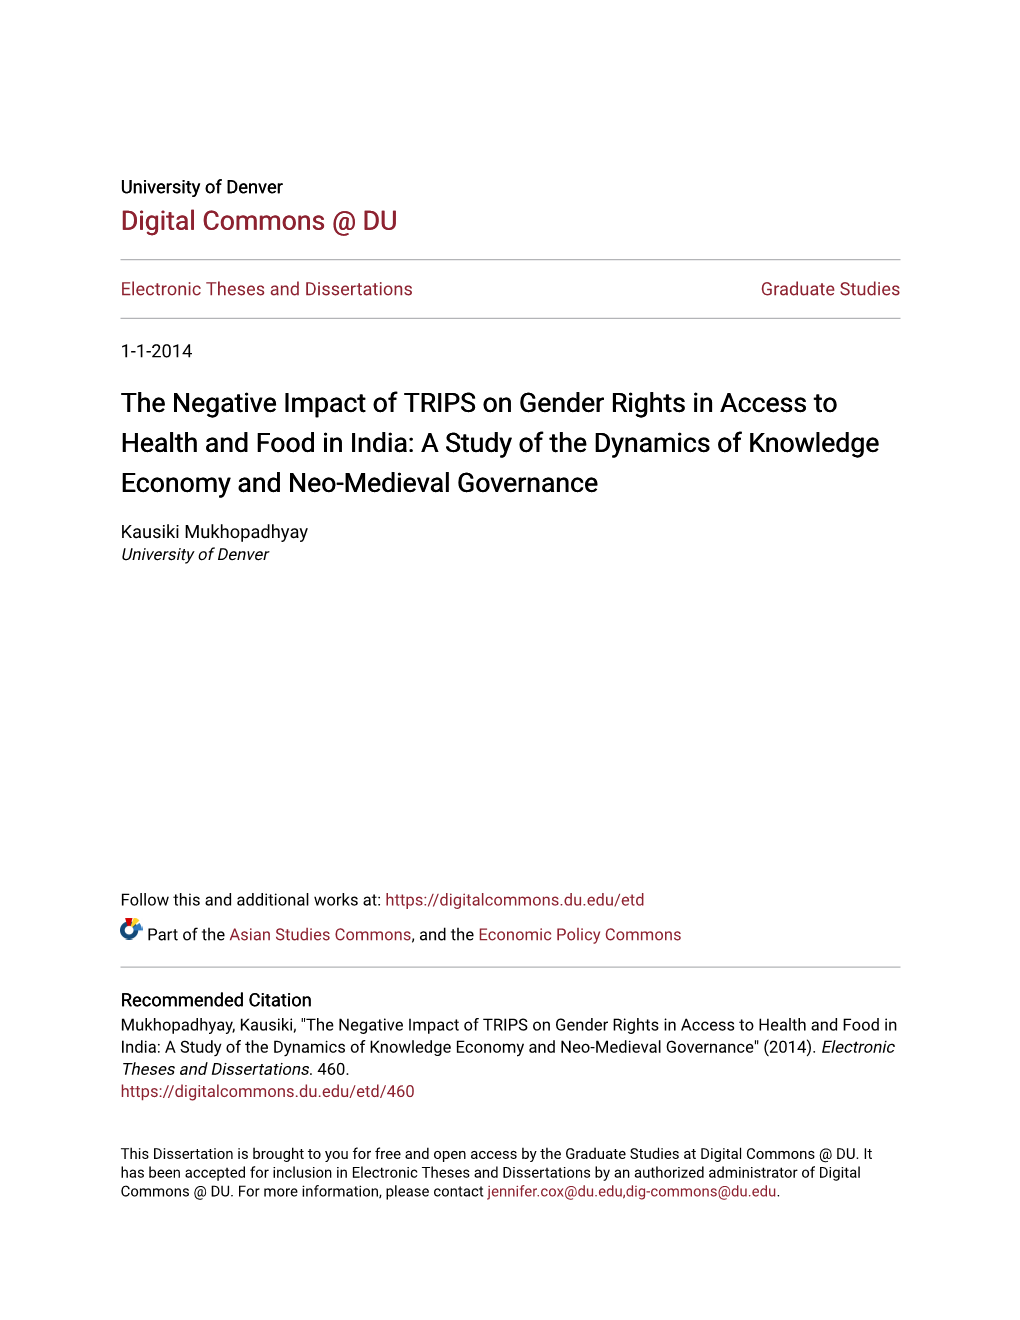 The Negative Impact of TRIPS on Gender Rights in Access to Health and Food in India: a Study of the Dynamics of Knowledge Economy and Neo-Medieval Governance